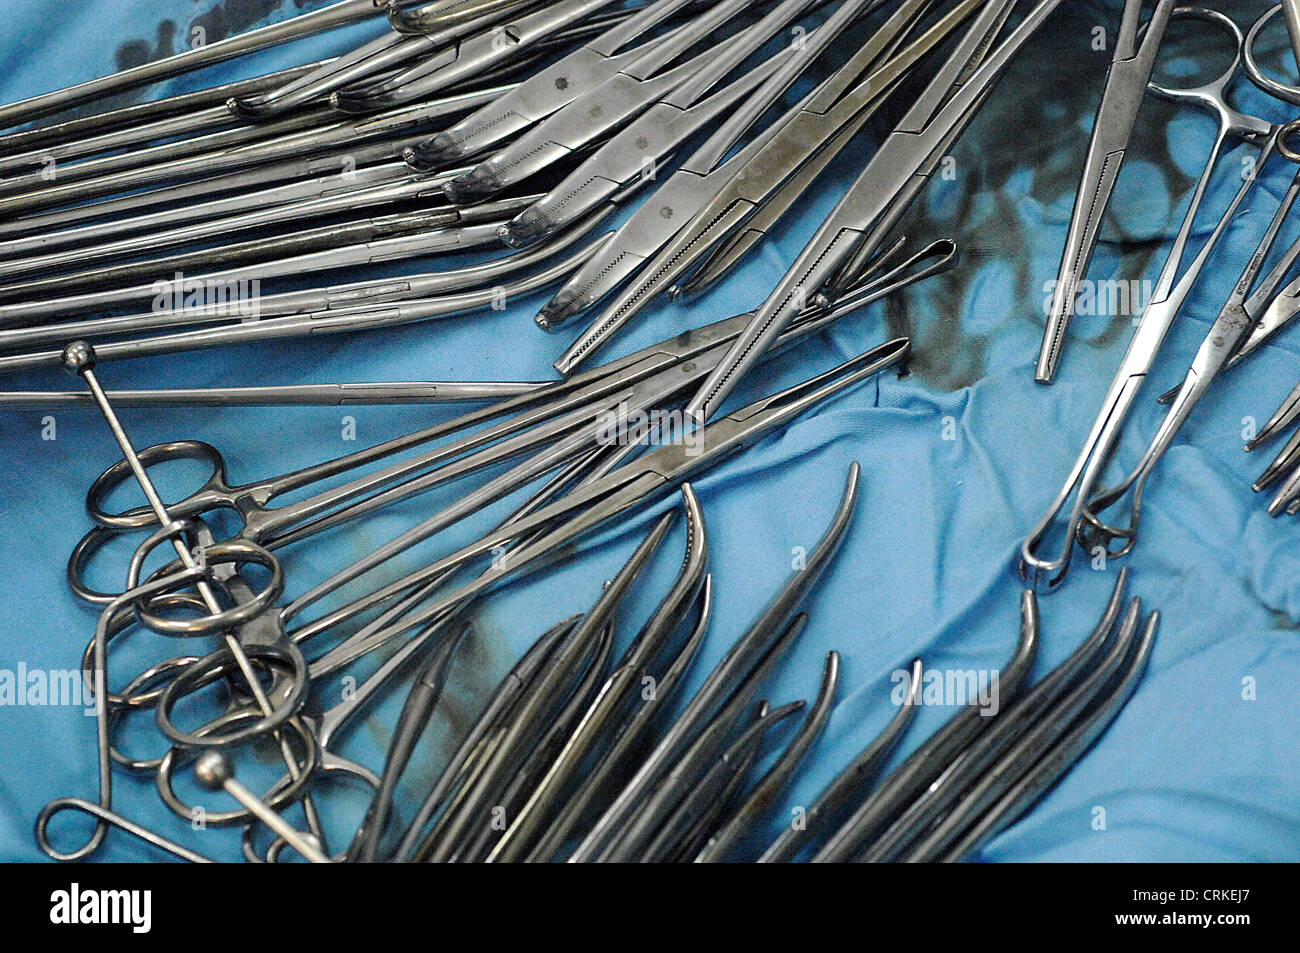 Clos-up of various surgical equipment. Stock Photo